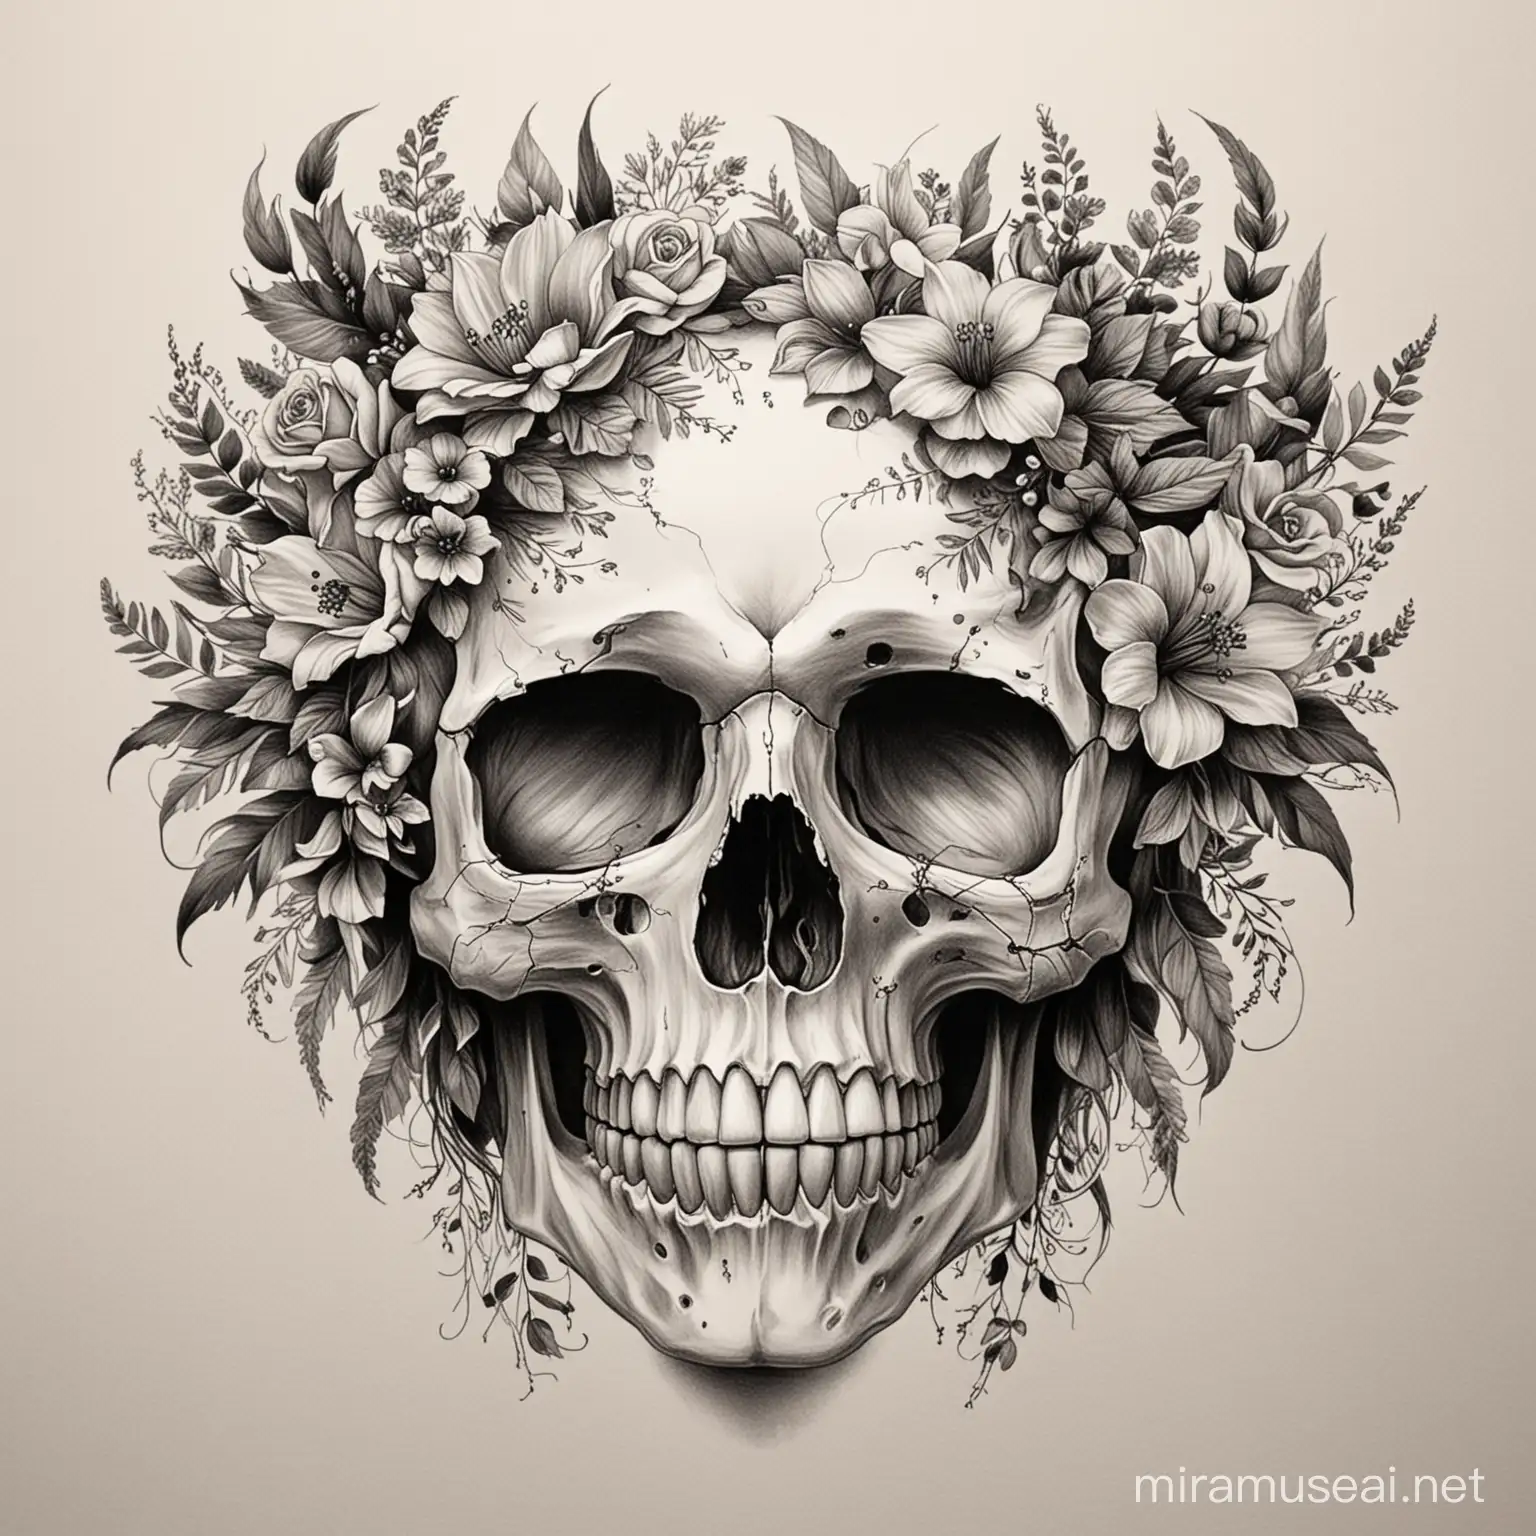 Floral Skull Art A Beautiful Fusion of Life and Death